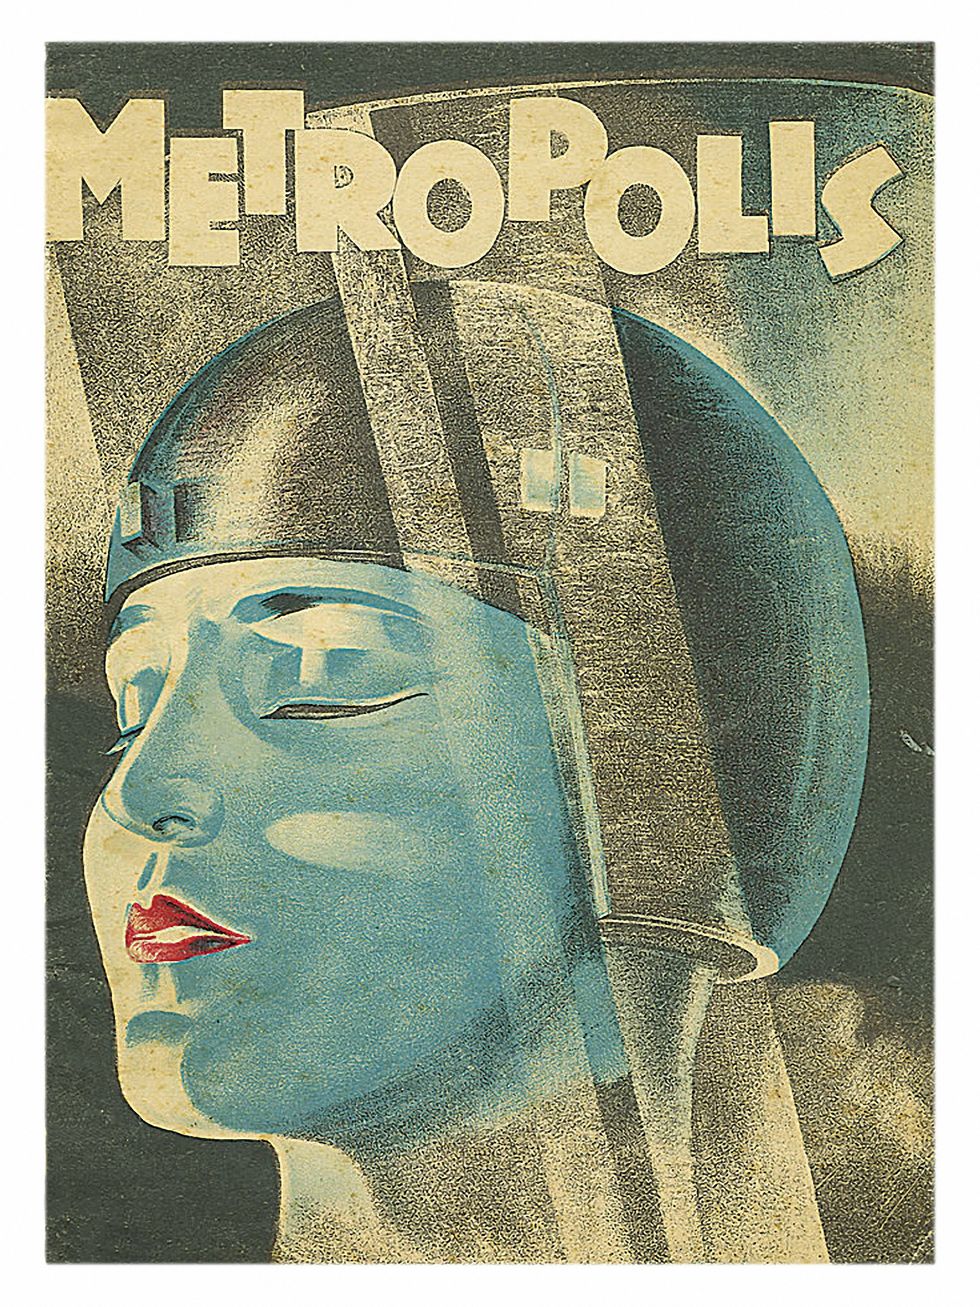 space lady on a poster that advertises the movie metropolis, 1927 photo by buyenlargegetty images